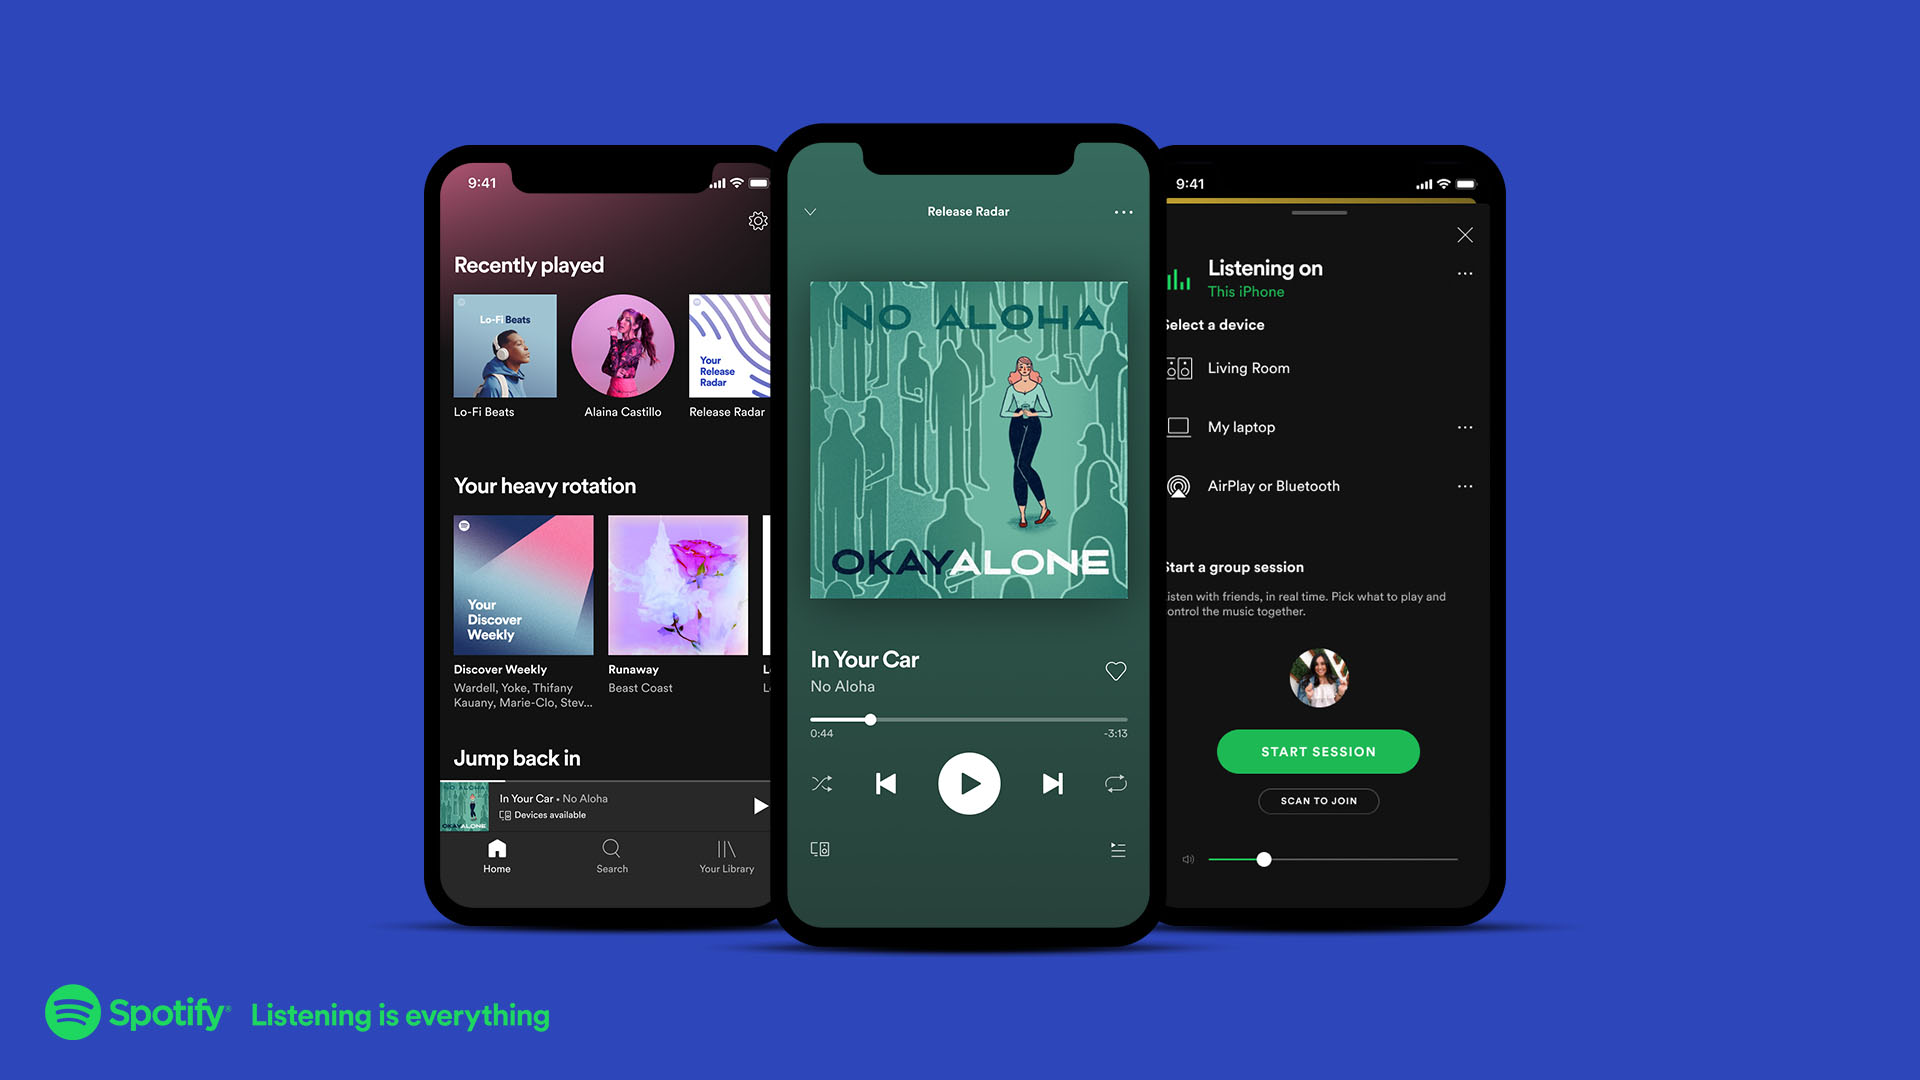 Spotify Success Story - The Most Loved Music Platform!